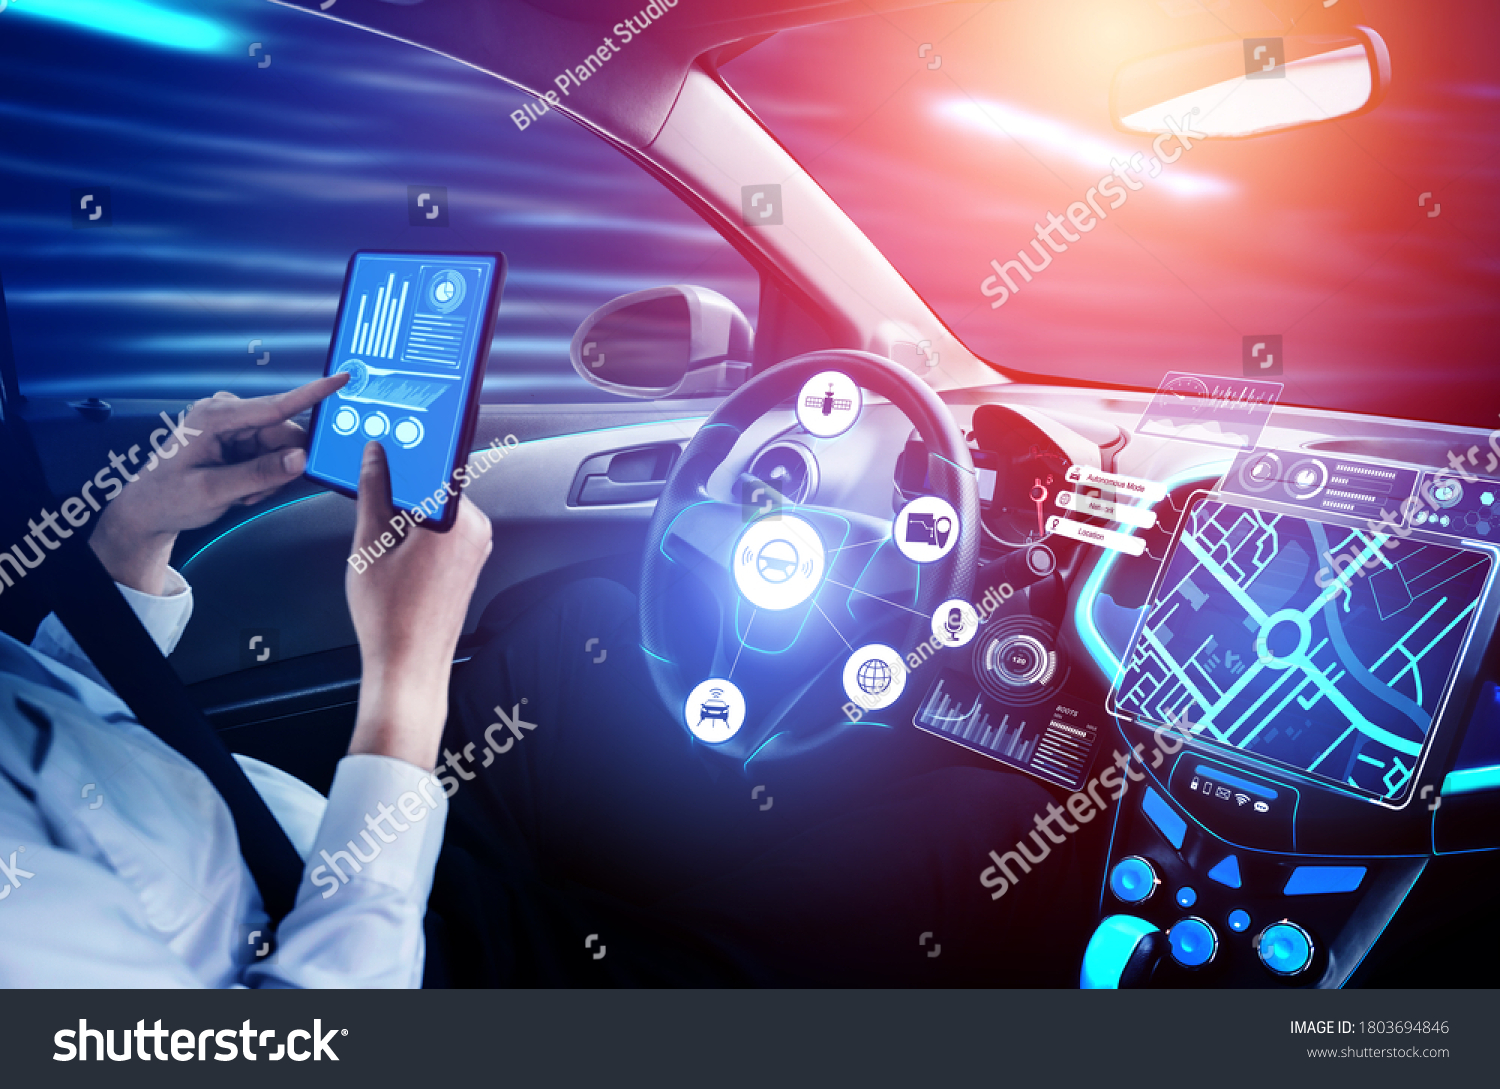 Driverless car interior with futuristic dashboard for autonomous control system . Inside view of cockpit HUD technology using AI artificial intelligence sensor to drive car without people driver . #1803694846